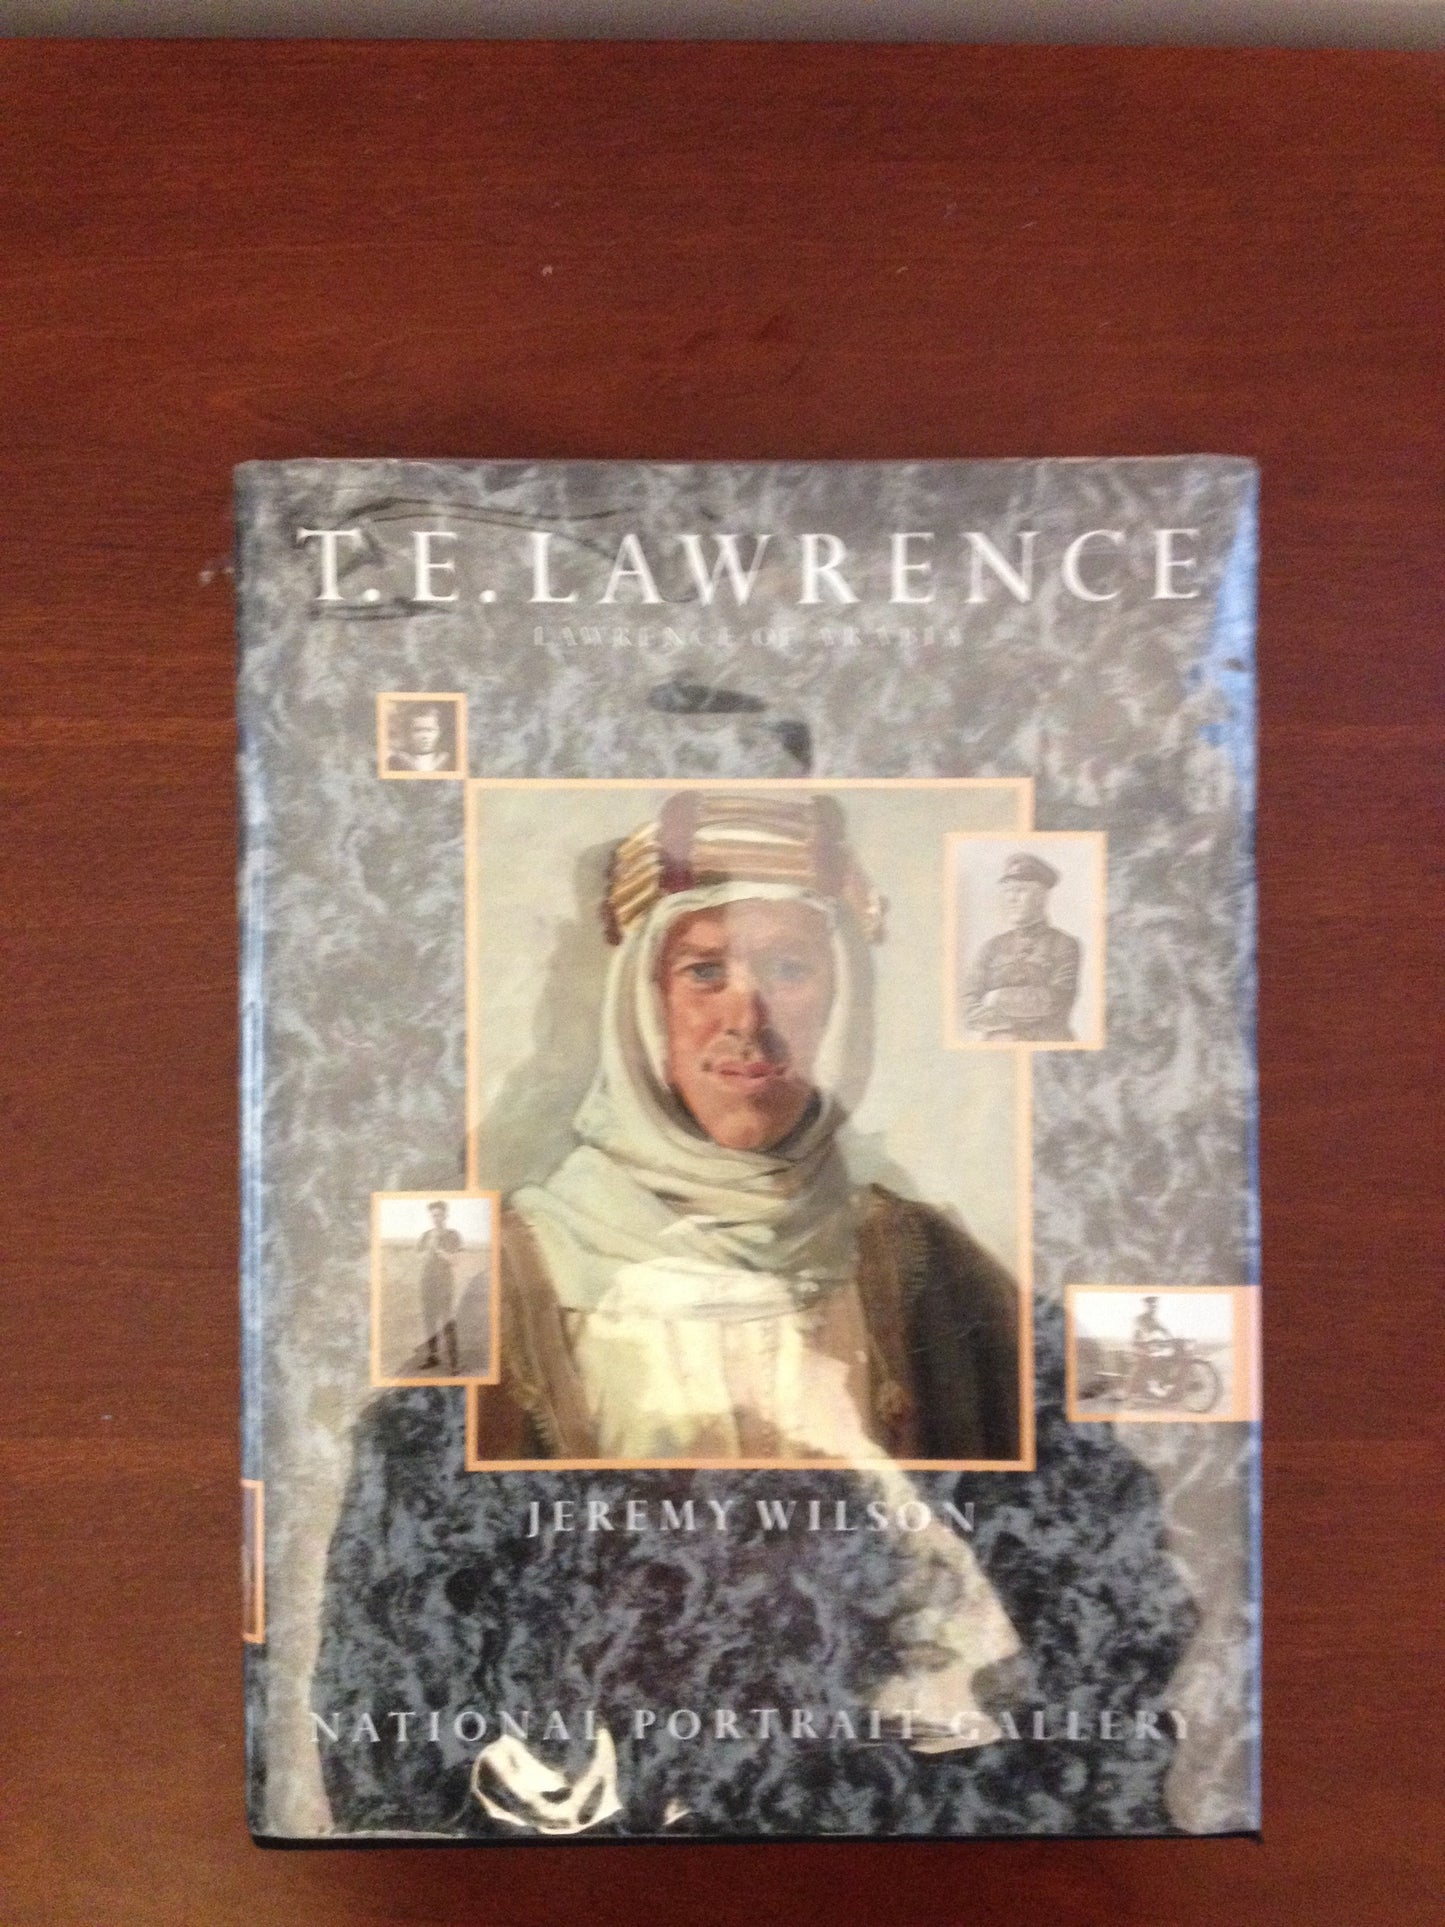 T.E. LAWRENCE - LAWRENCE OF ARABIA - JEREMY WILSON BooksCardsNBikes